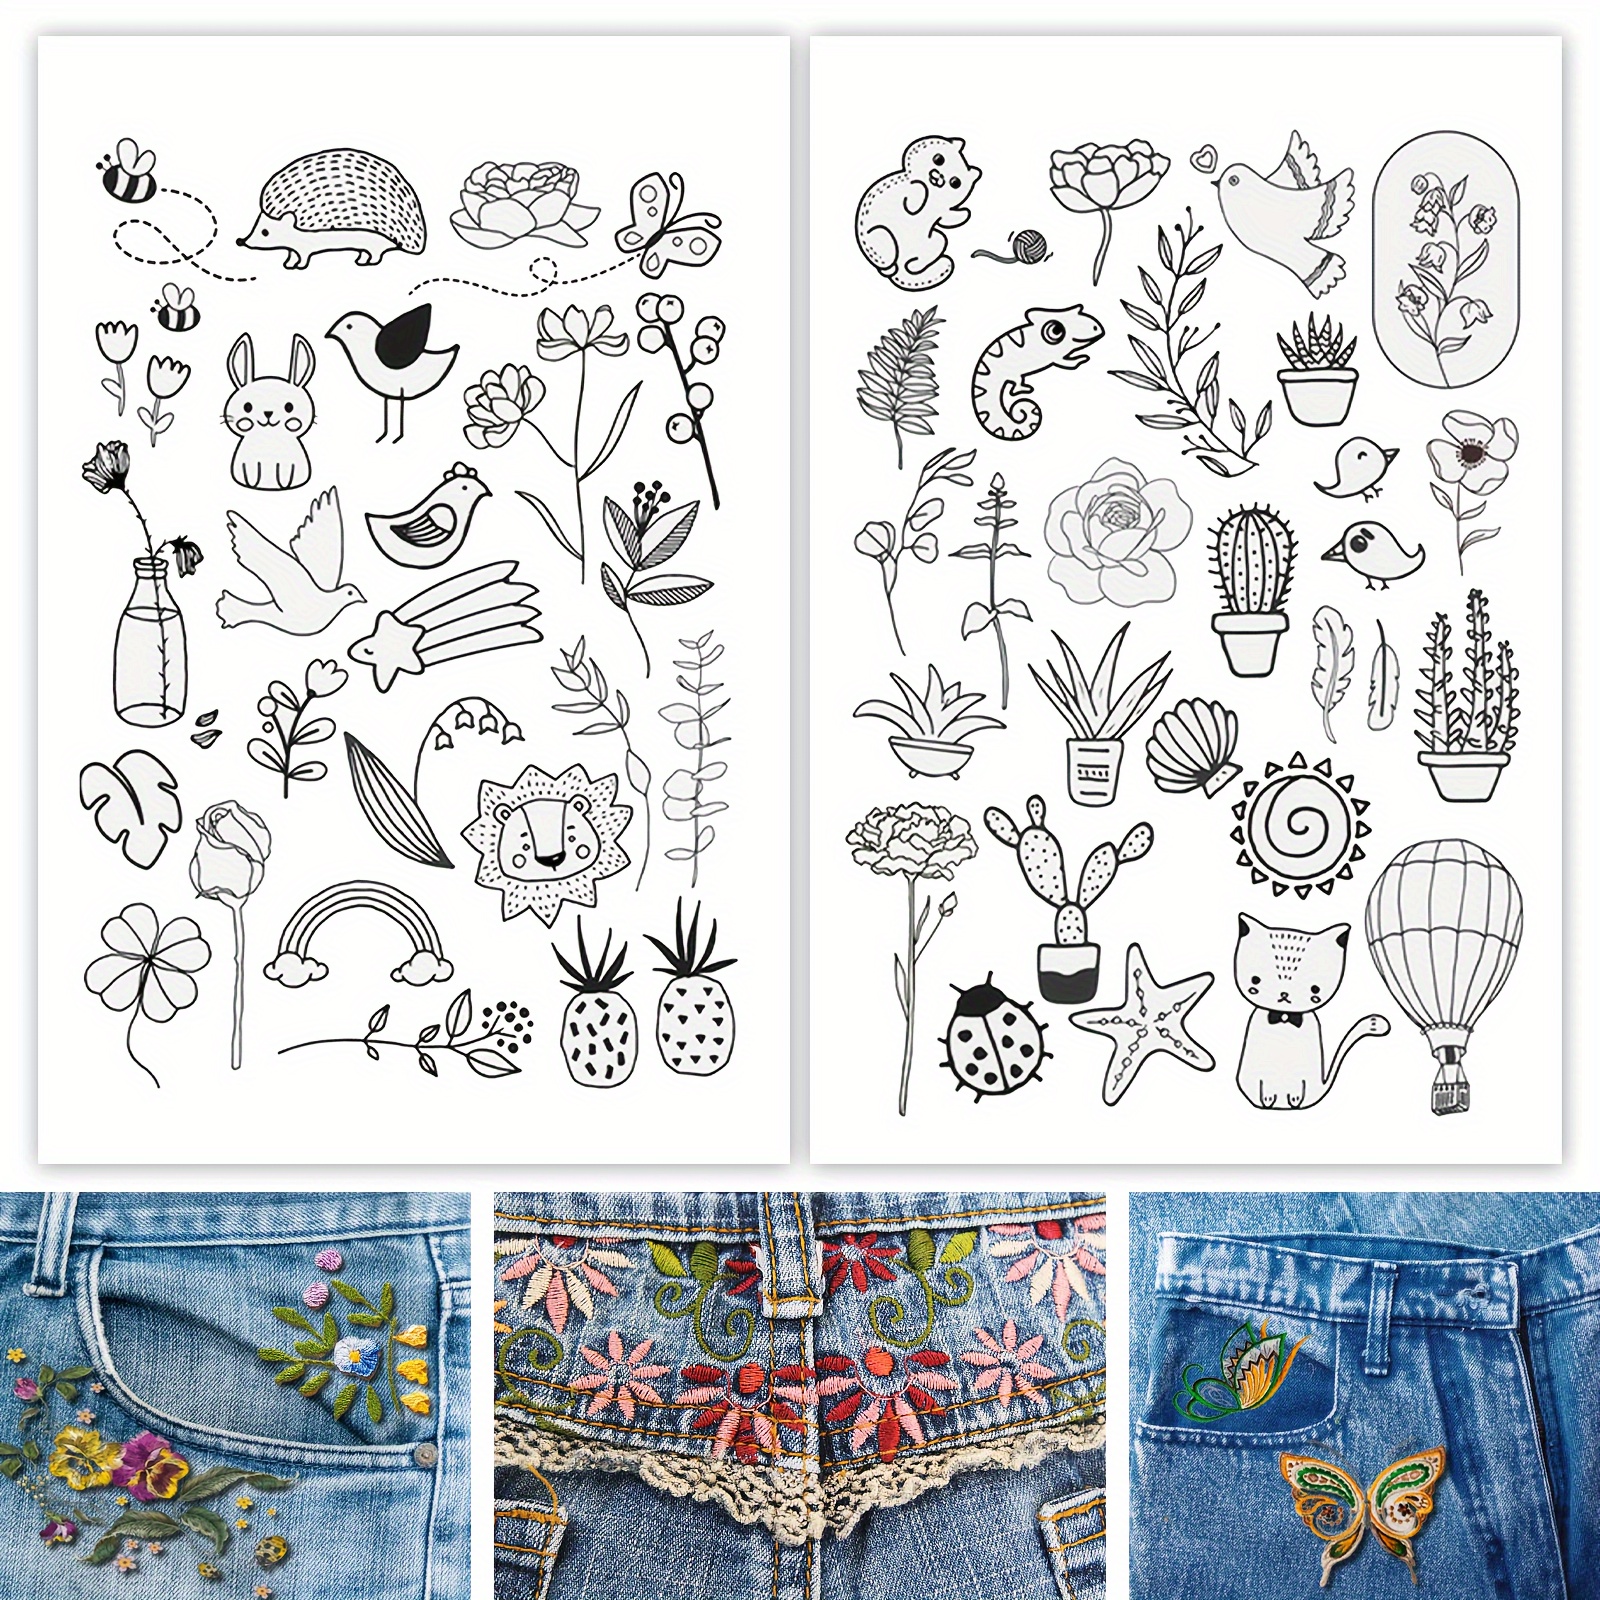 72 Pcs Water Soluble Embroidery Patterns Stabilizers, Stick and Stitch  Embroidery Transfers Paper with Floral Letter Number Patterns for  Embroidery